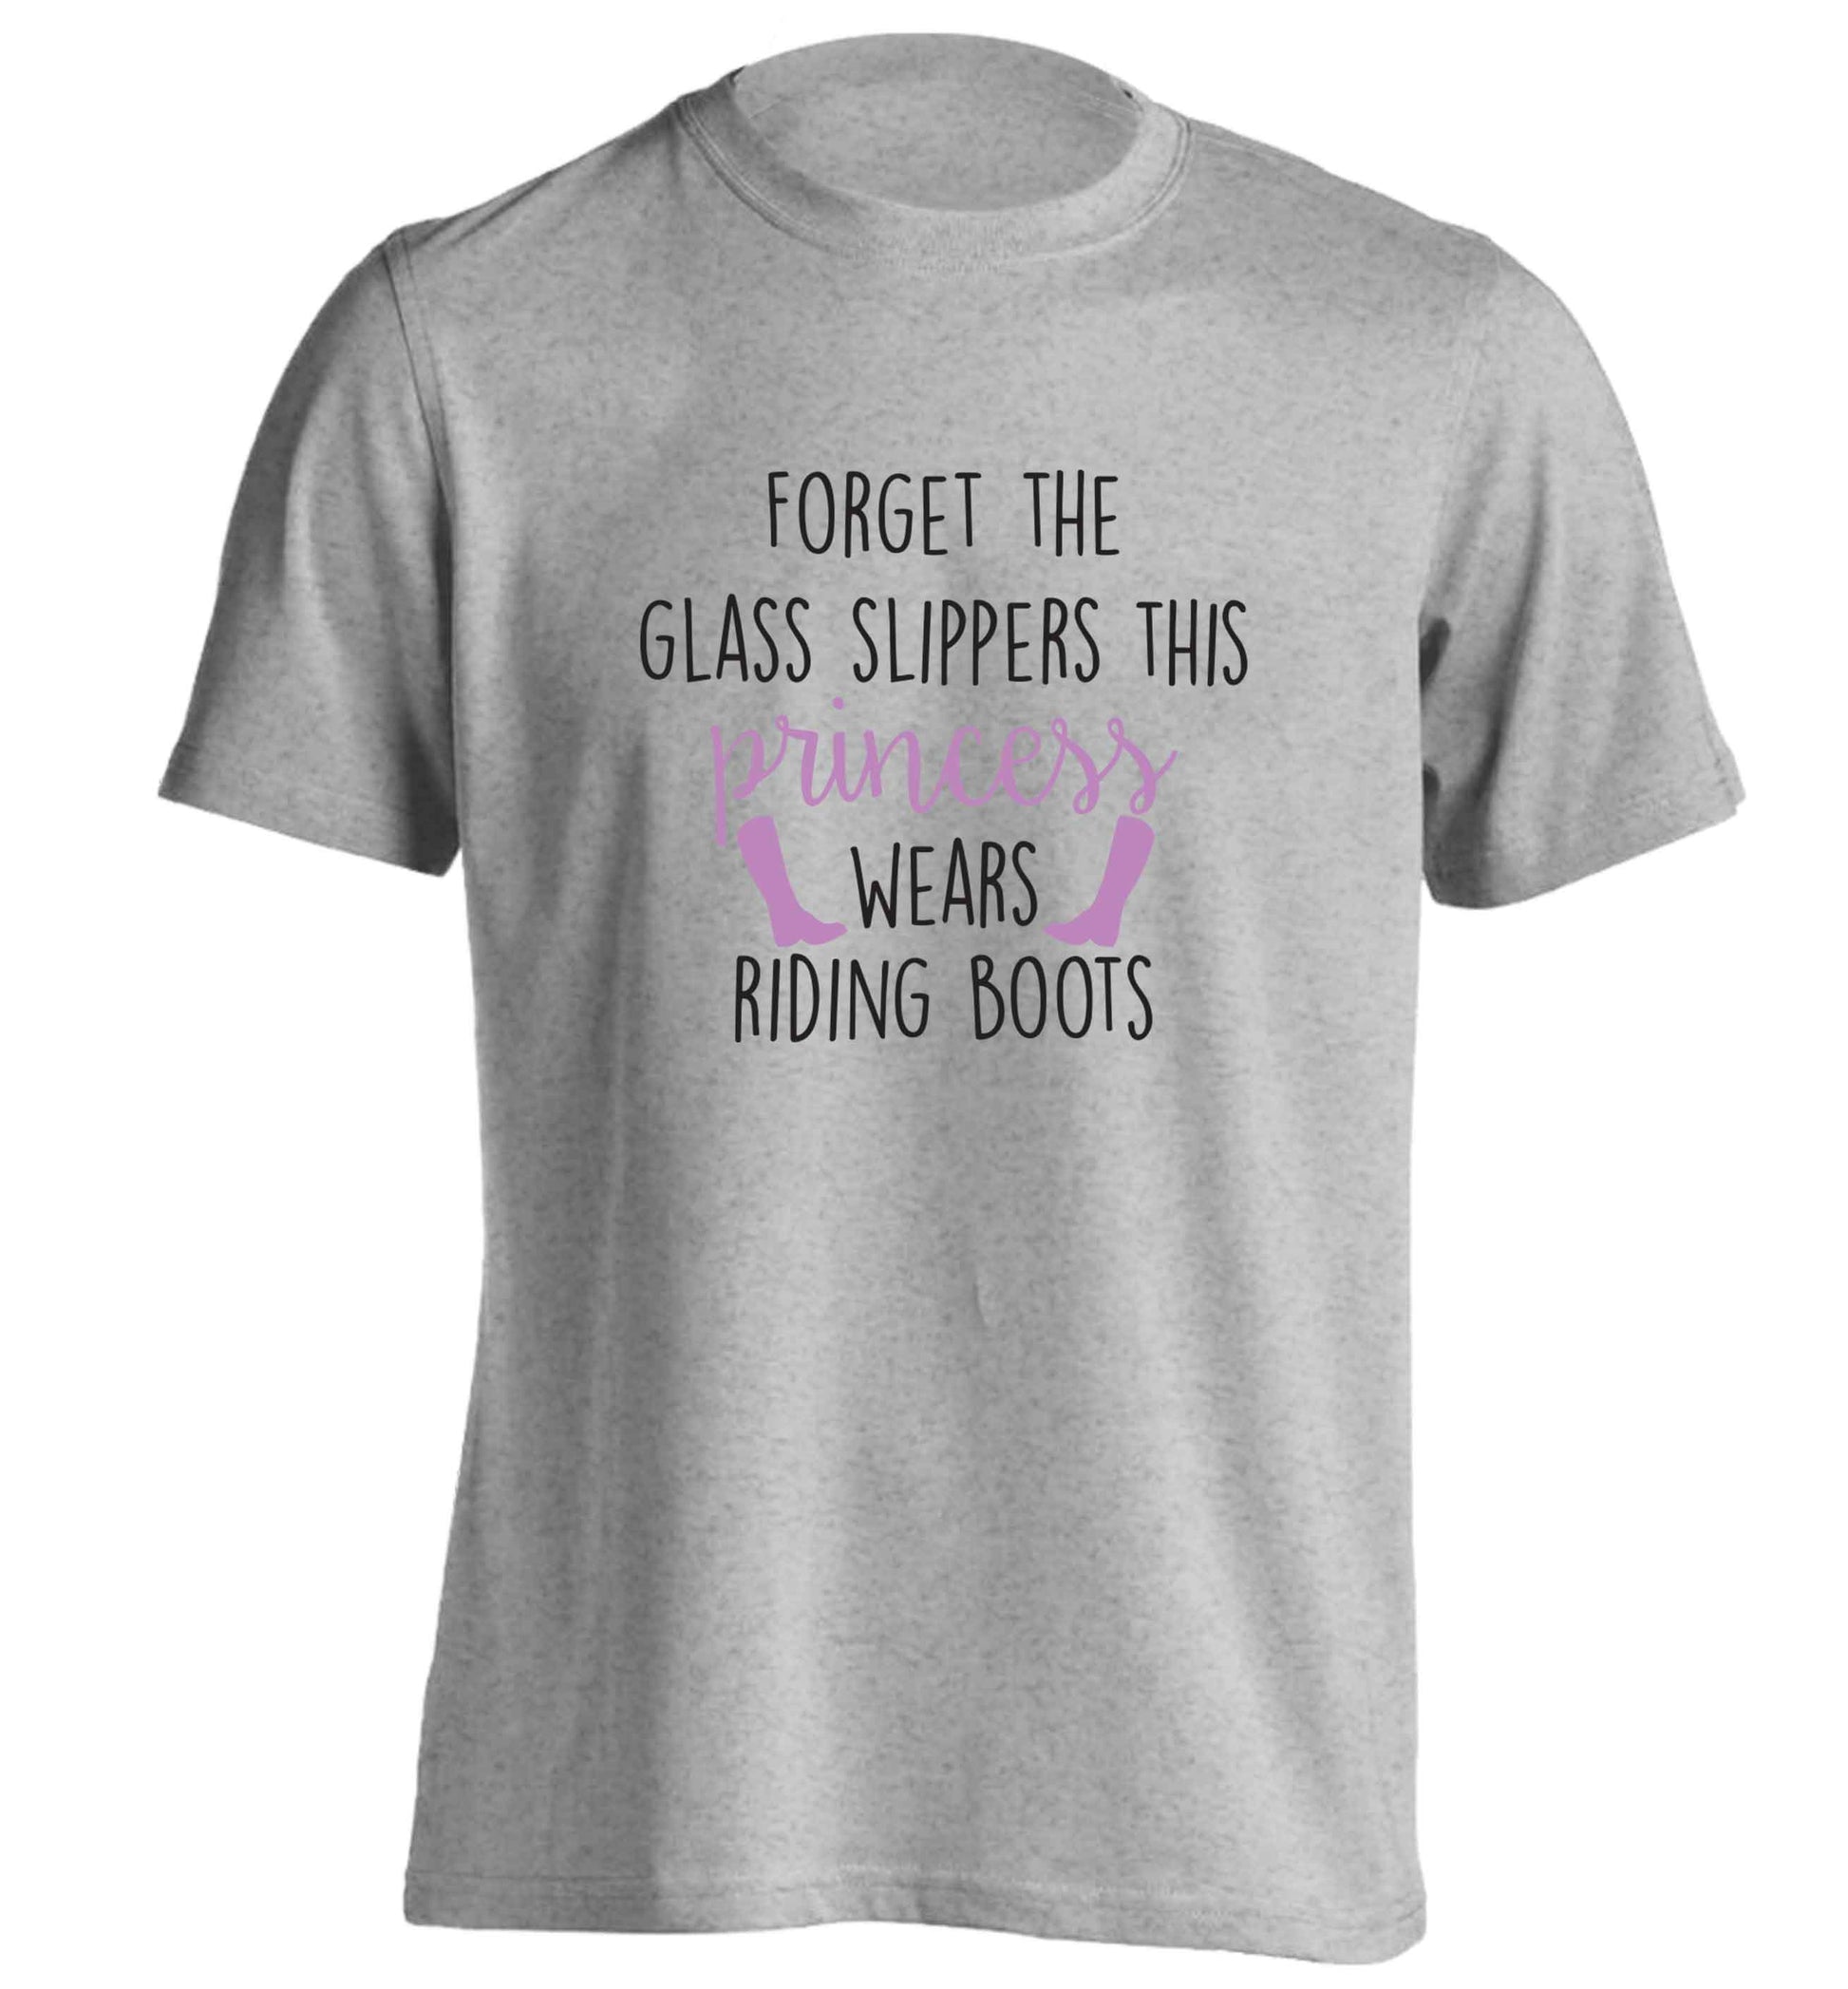 Forget the glass slippers this princess wears riding boots adults unisex grey Tshirt 2XL